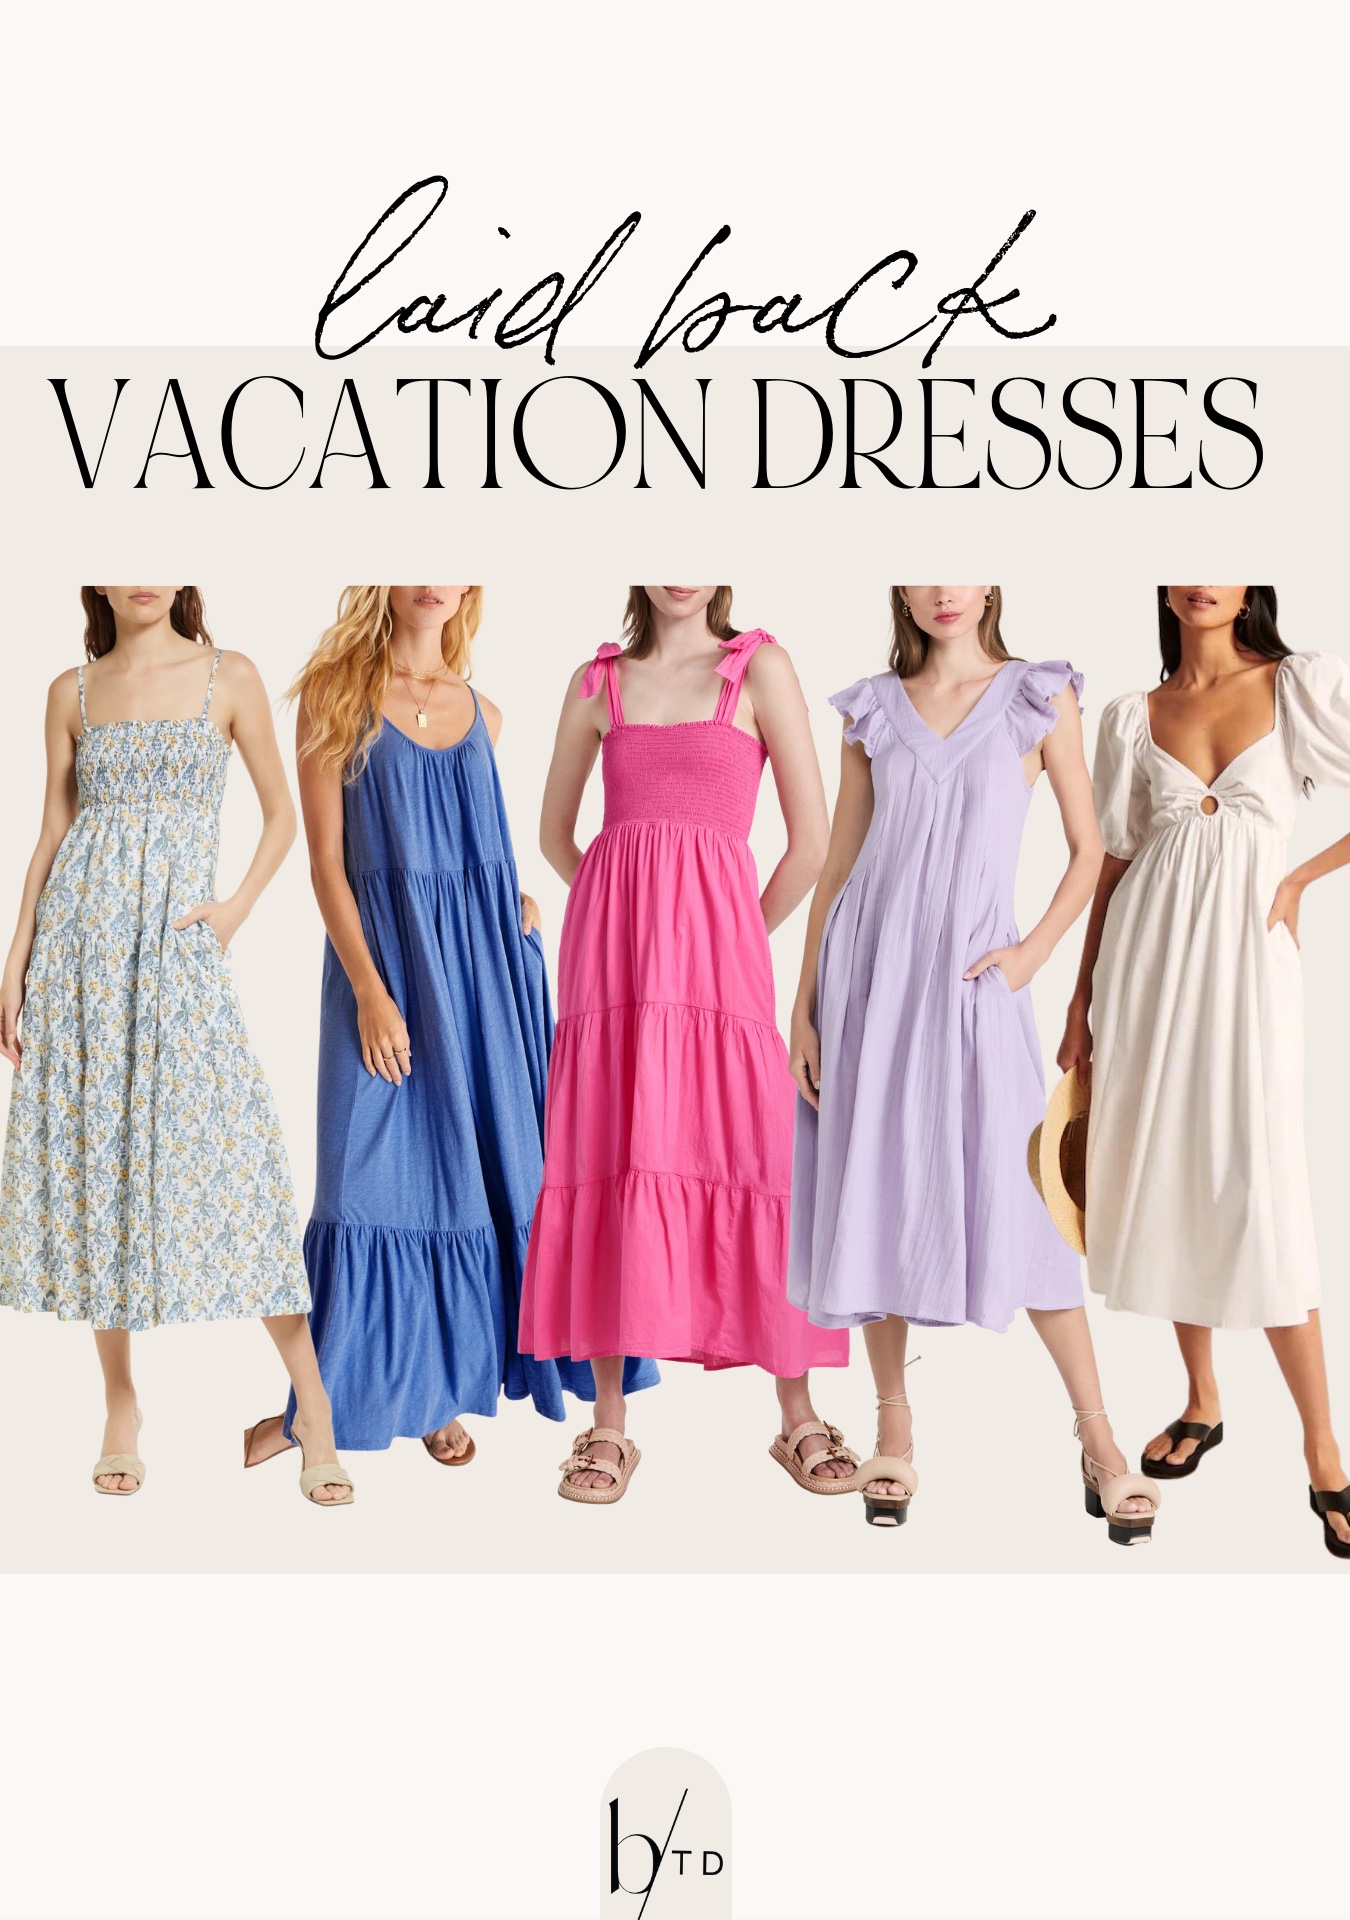 Brighton Butler laid back vacation dresses